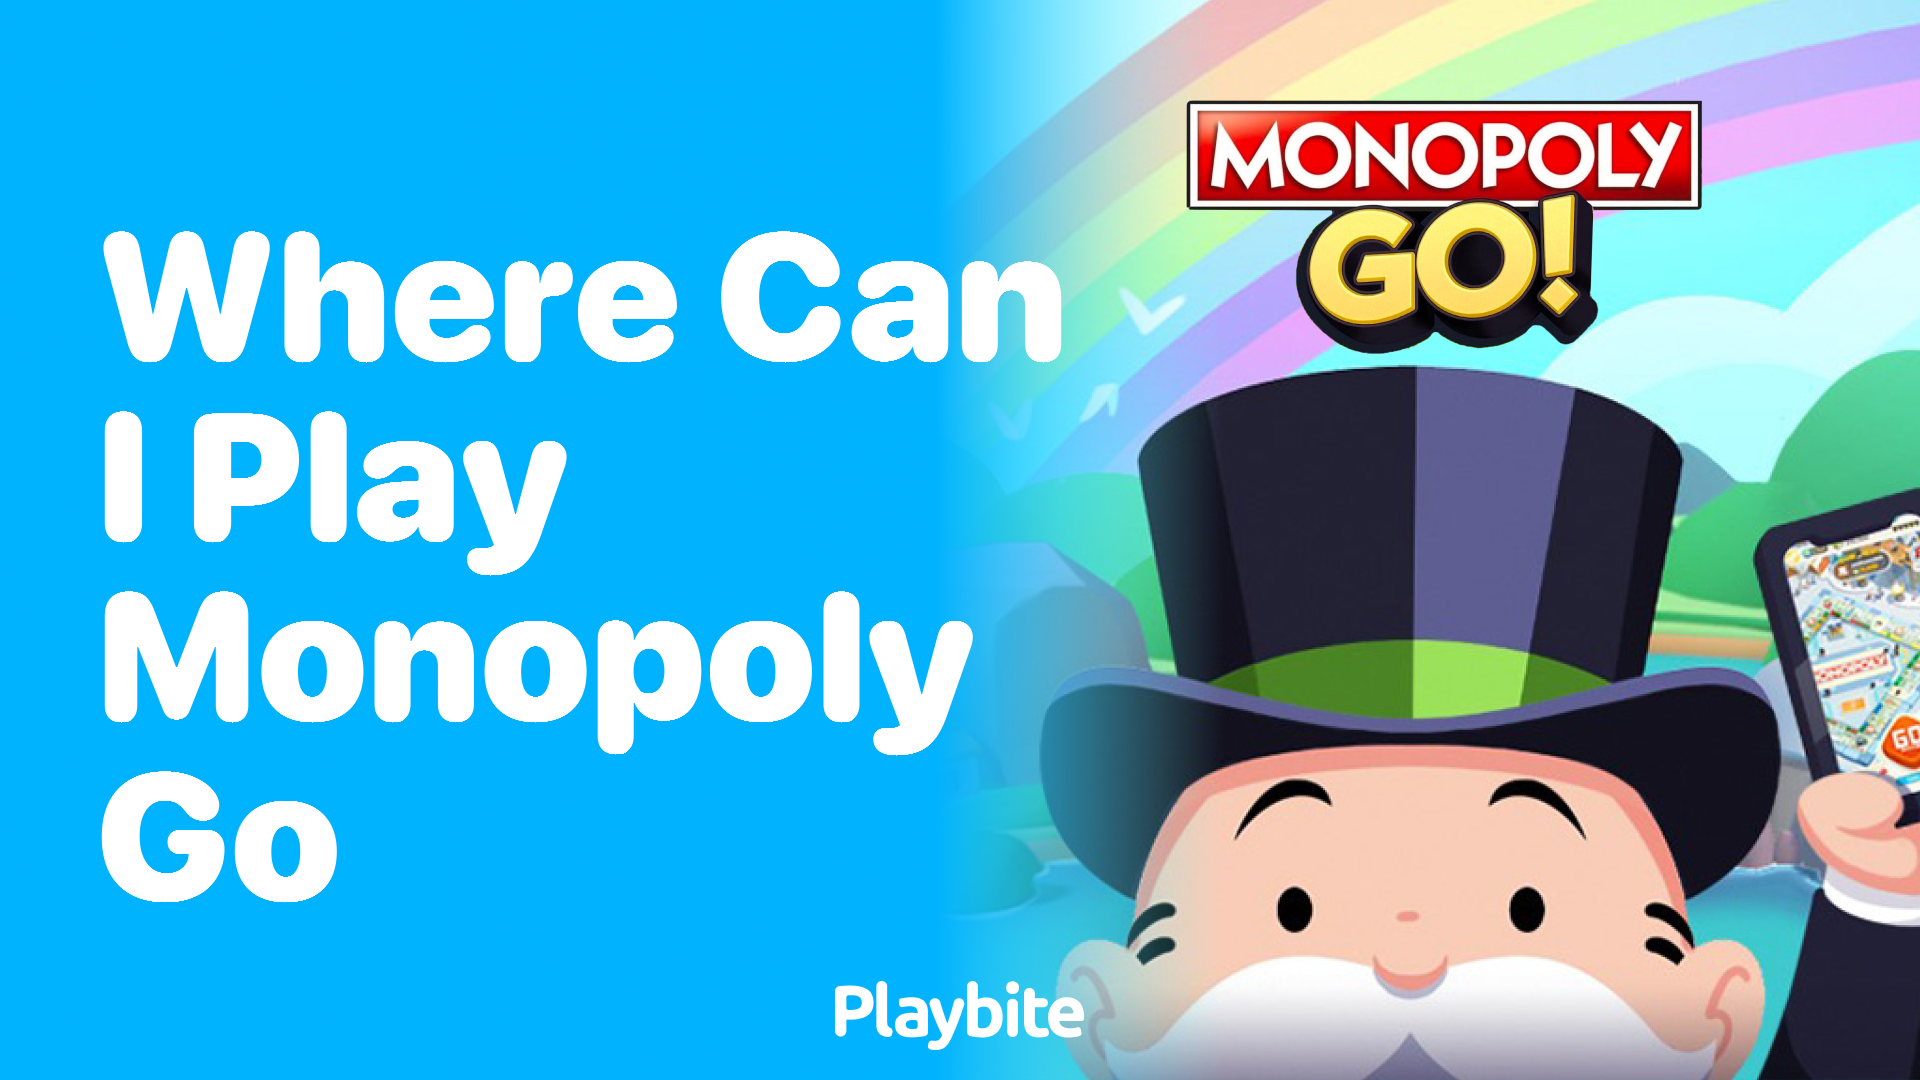 Where Can I Play Monopoly Go?